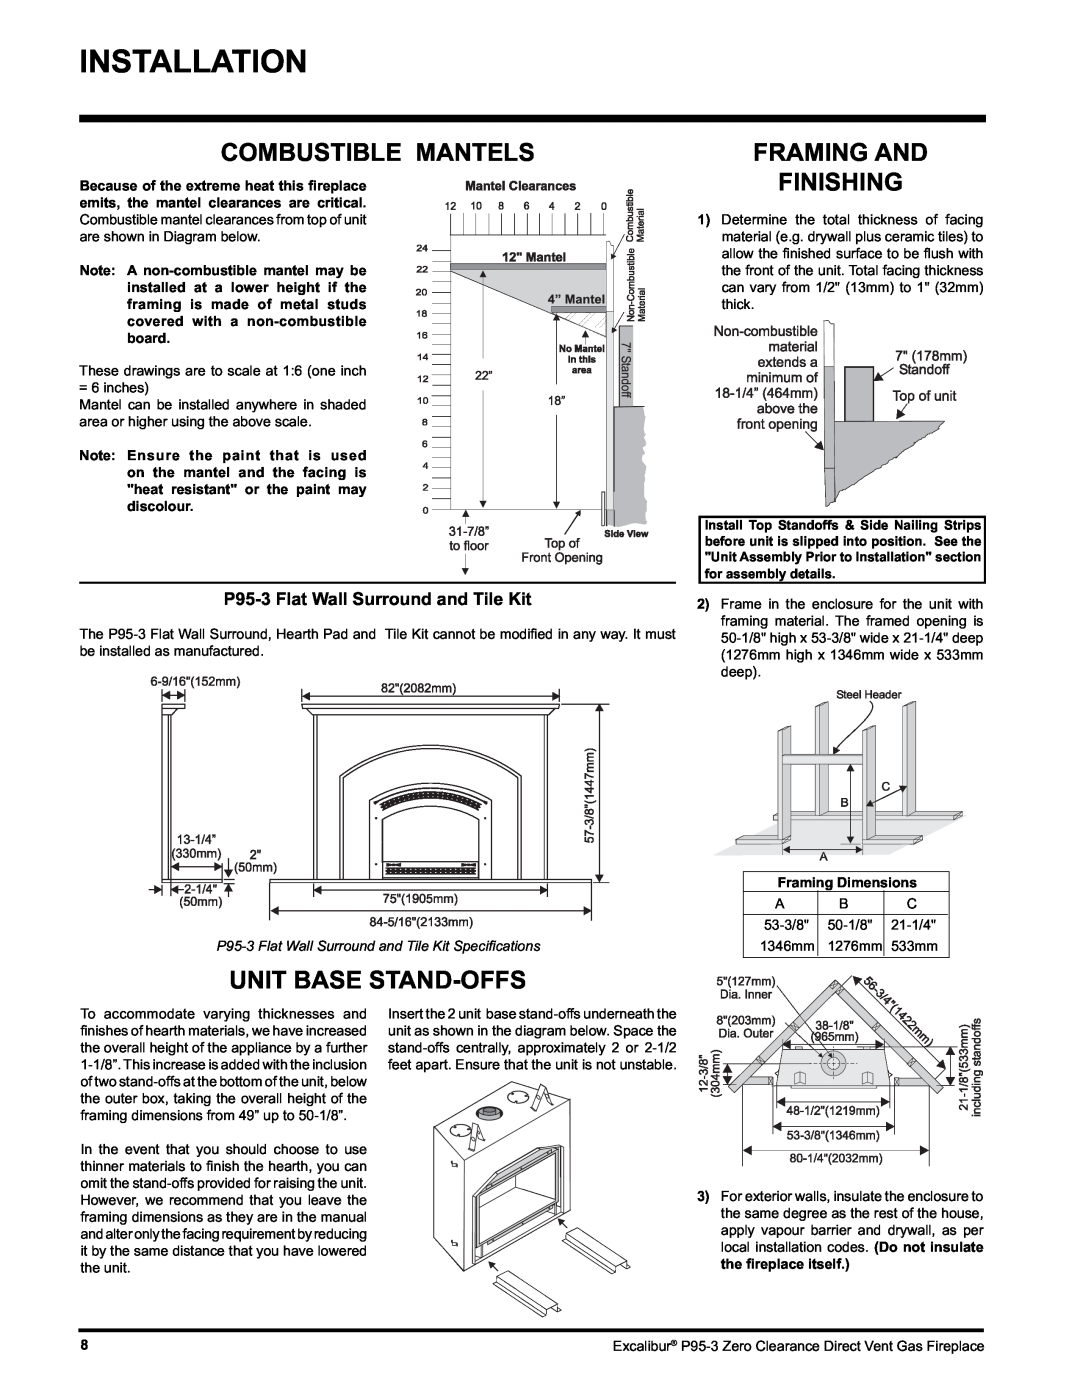 Excalibur electronic P95-NG3, P95-LP3 Installation, Combustible Mantels, Framing And Finishing, Unit Base Stand-Offs 